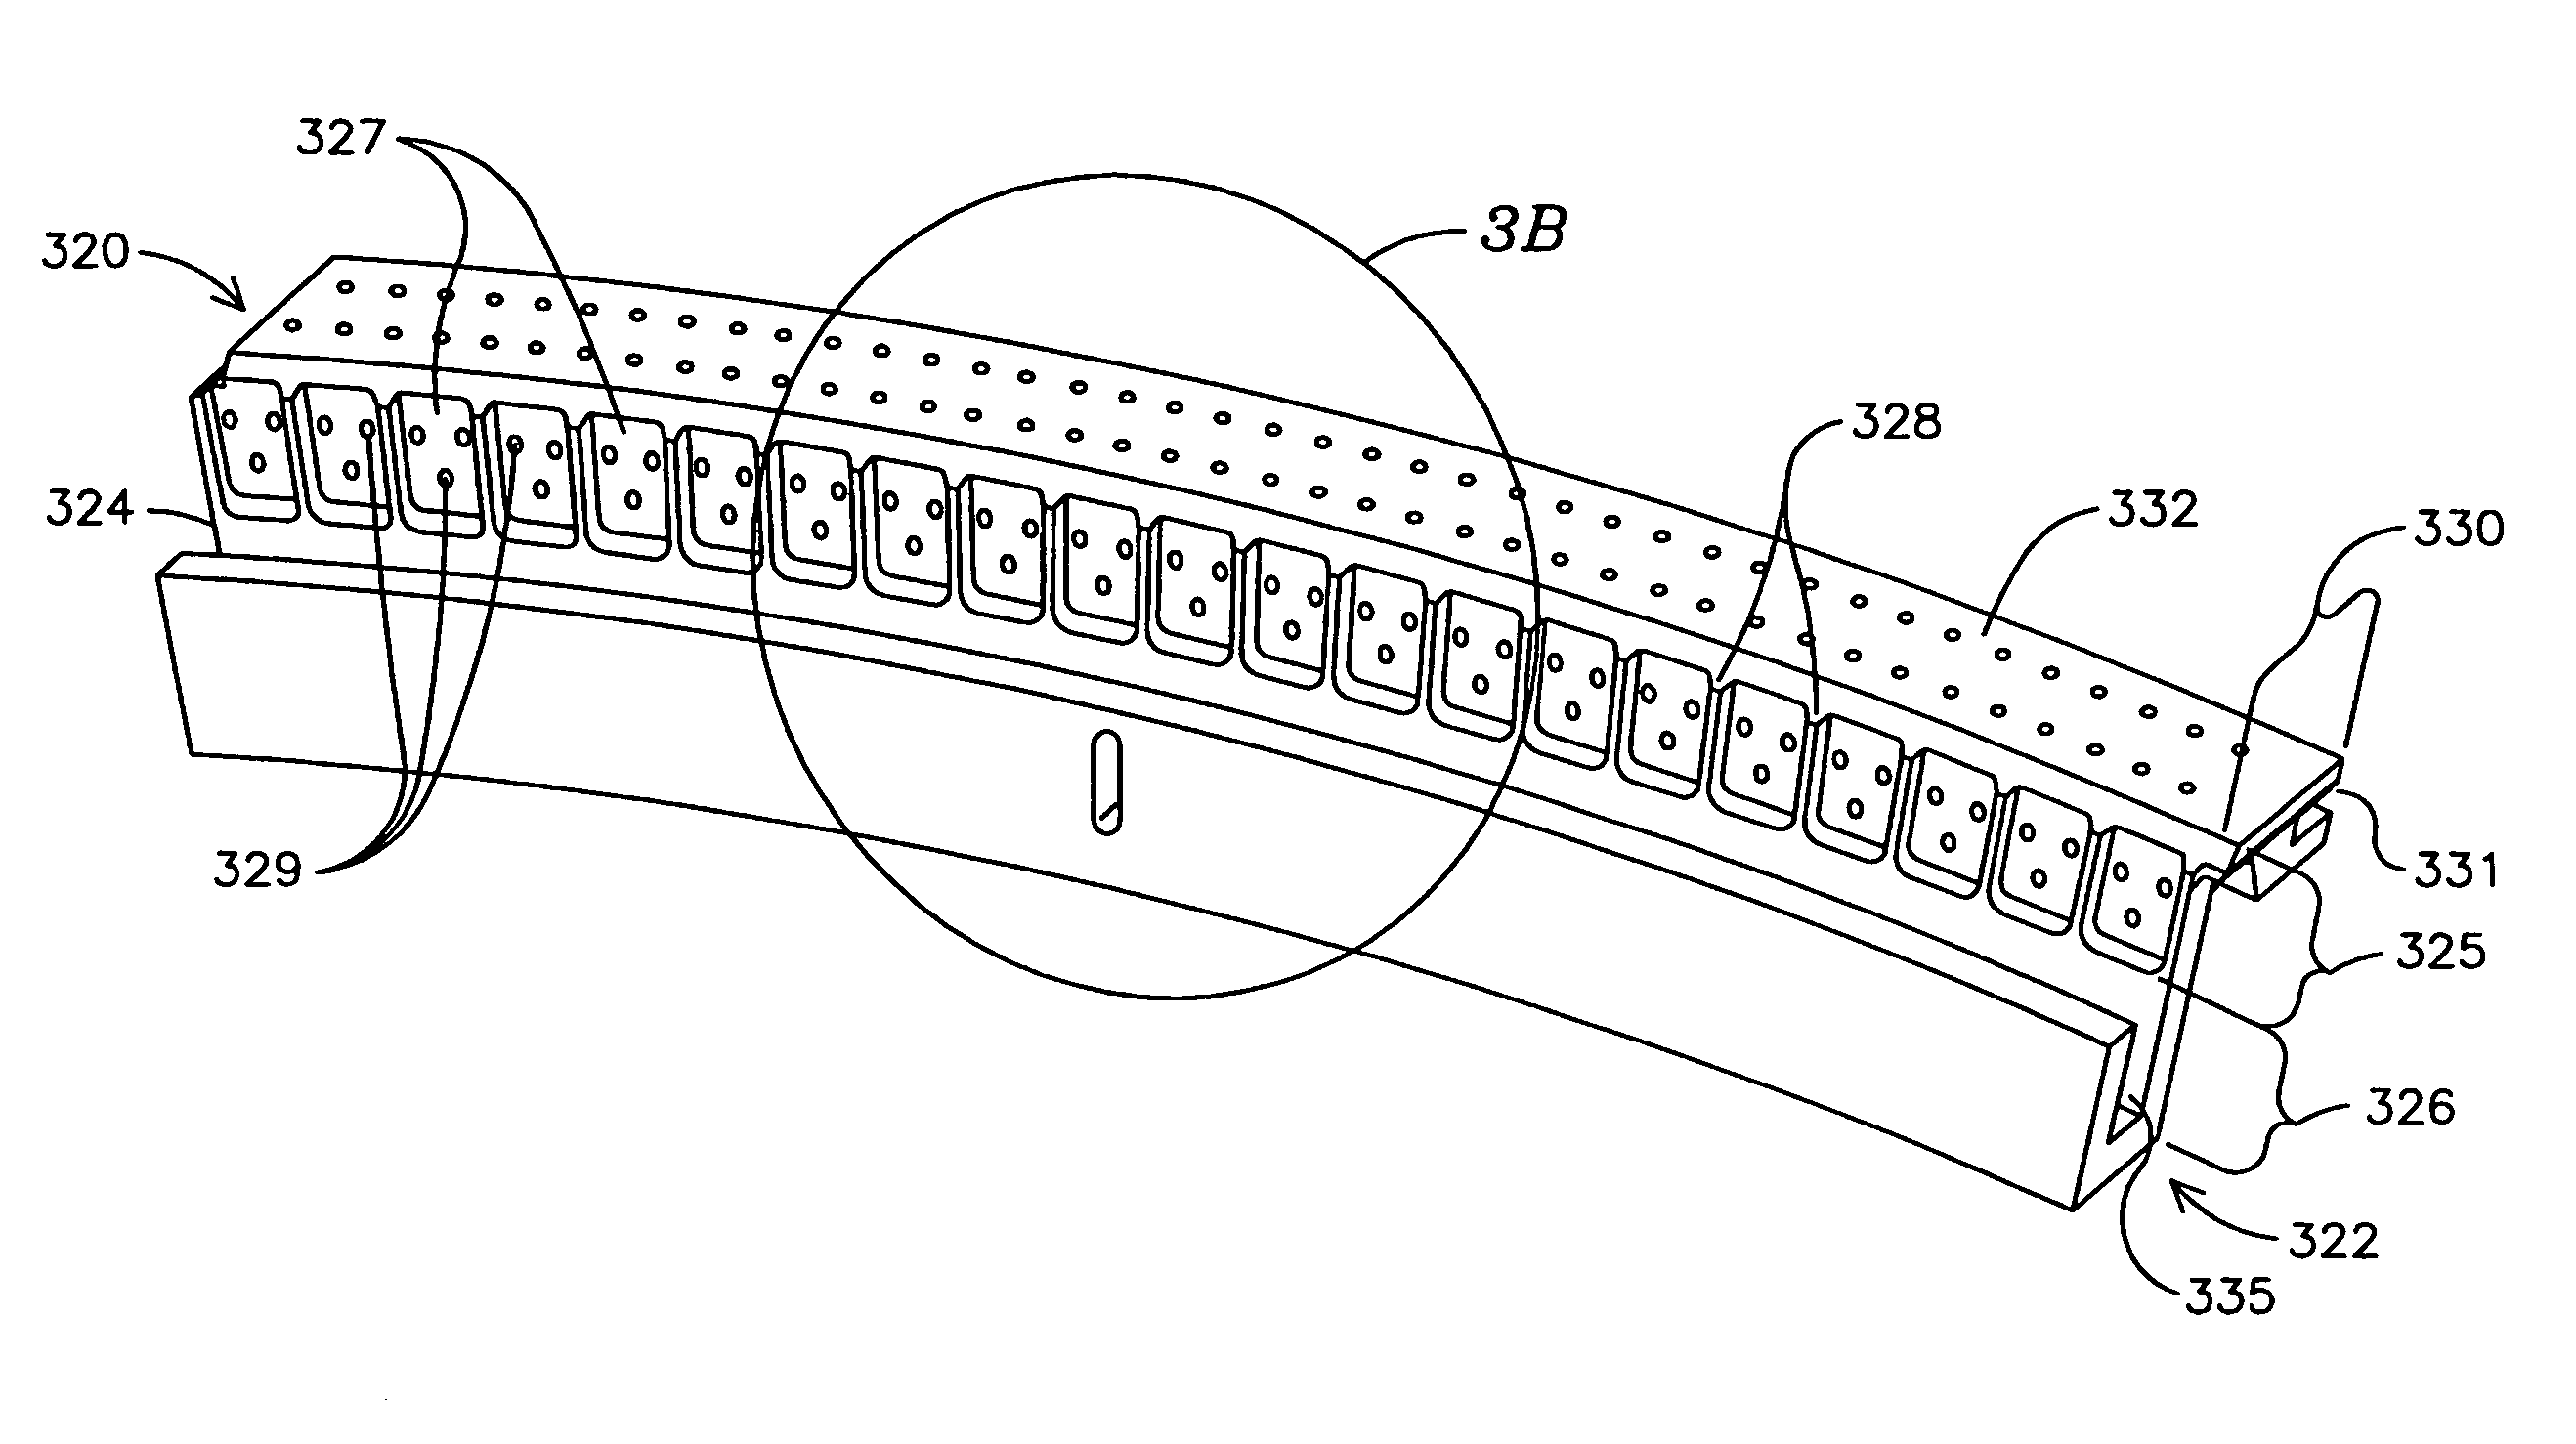 Transition-to turbine seal apparatus and transition-to-turbine seal junction of a gas turbine engine